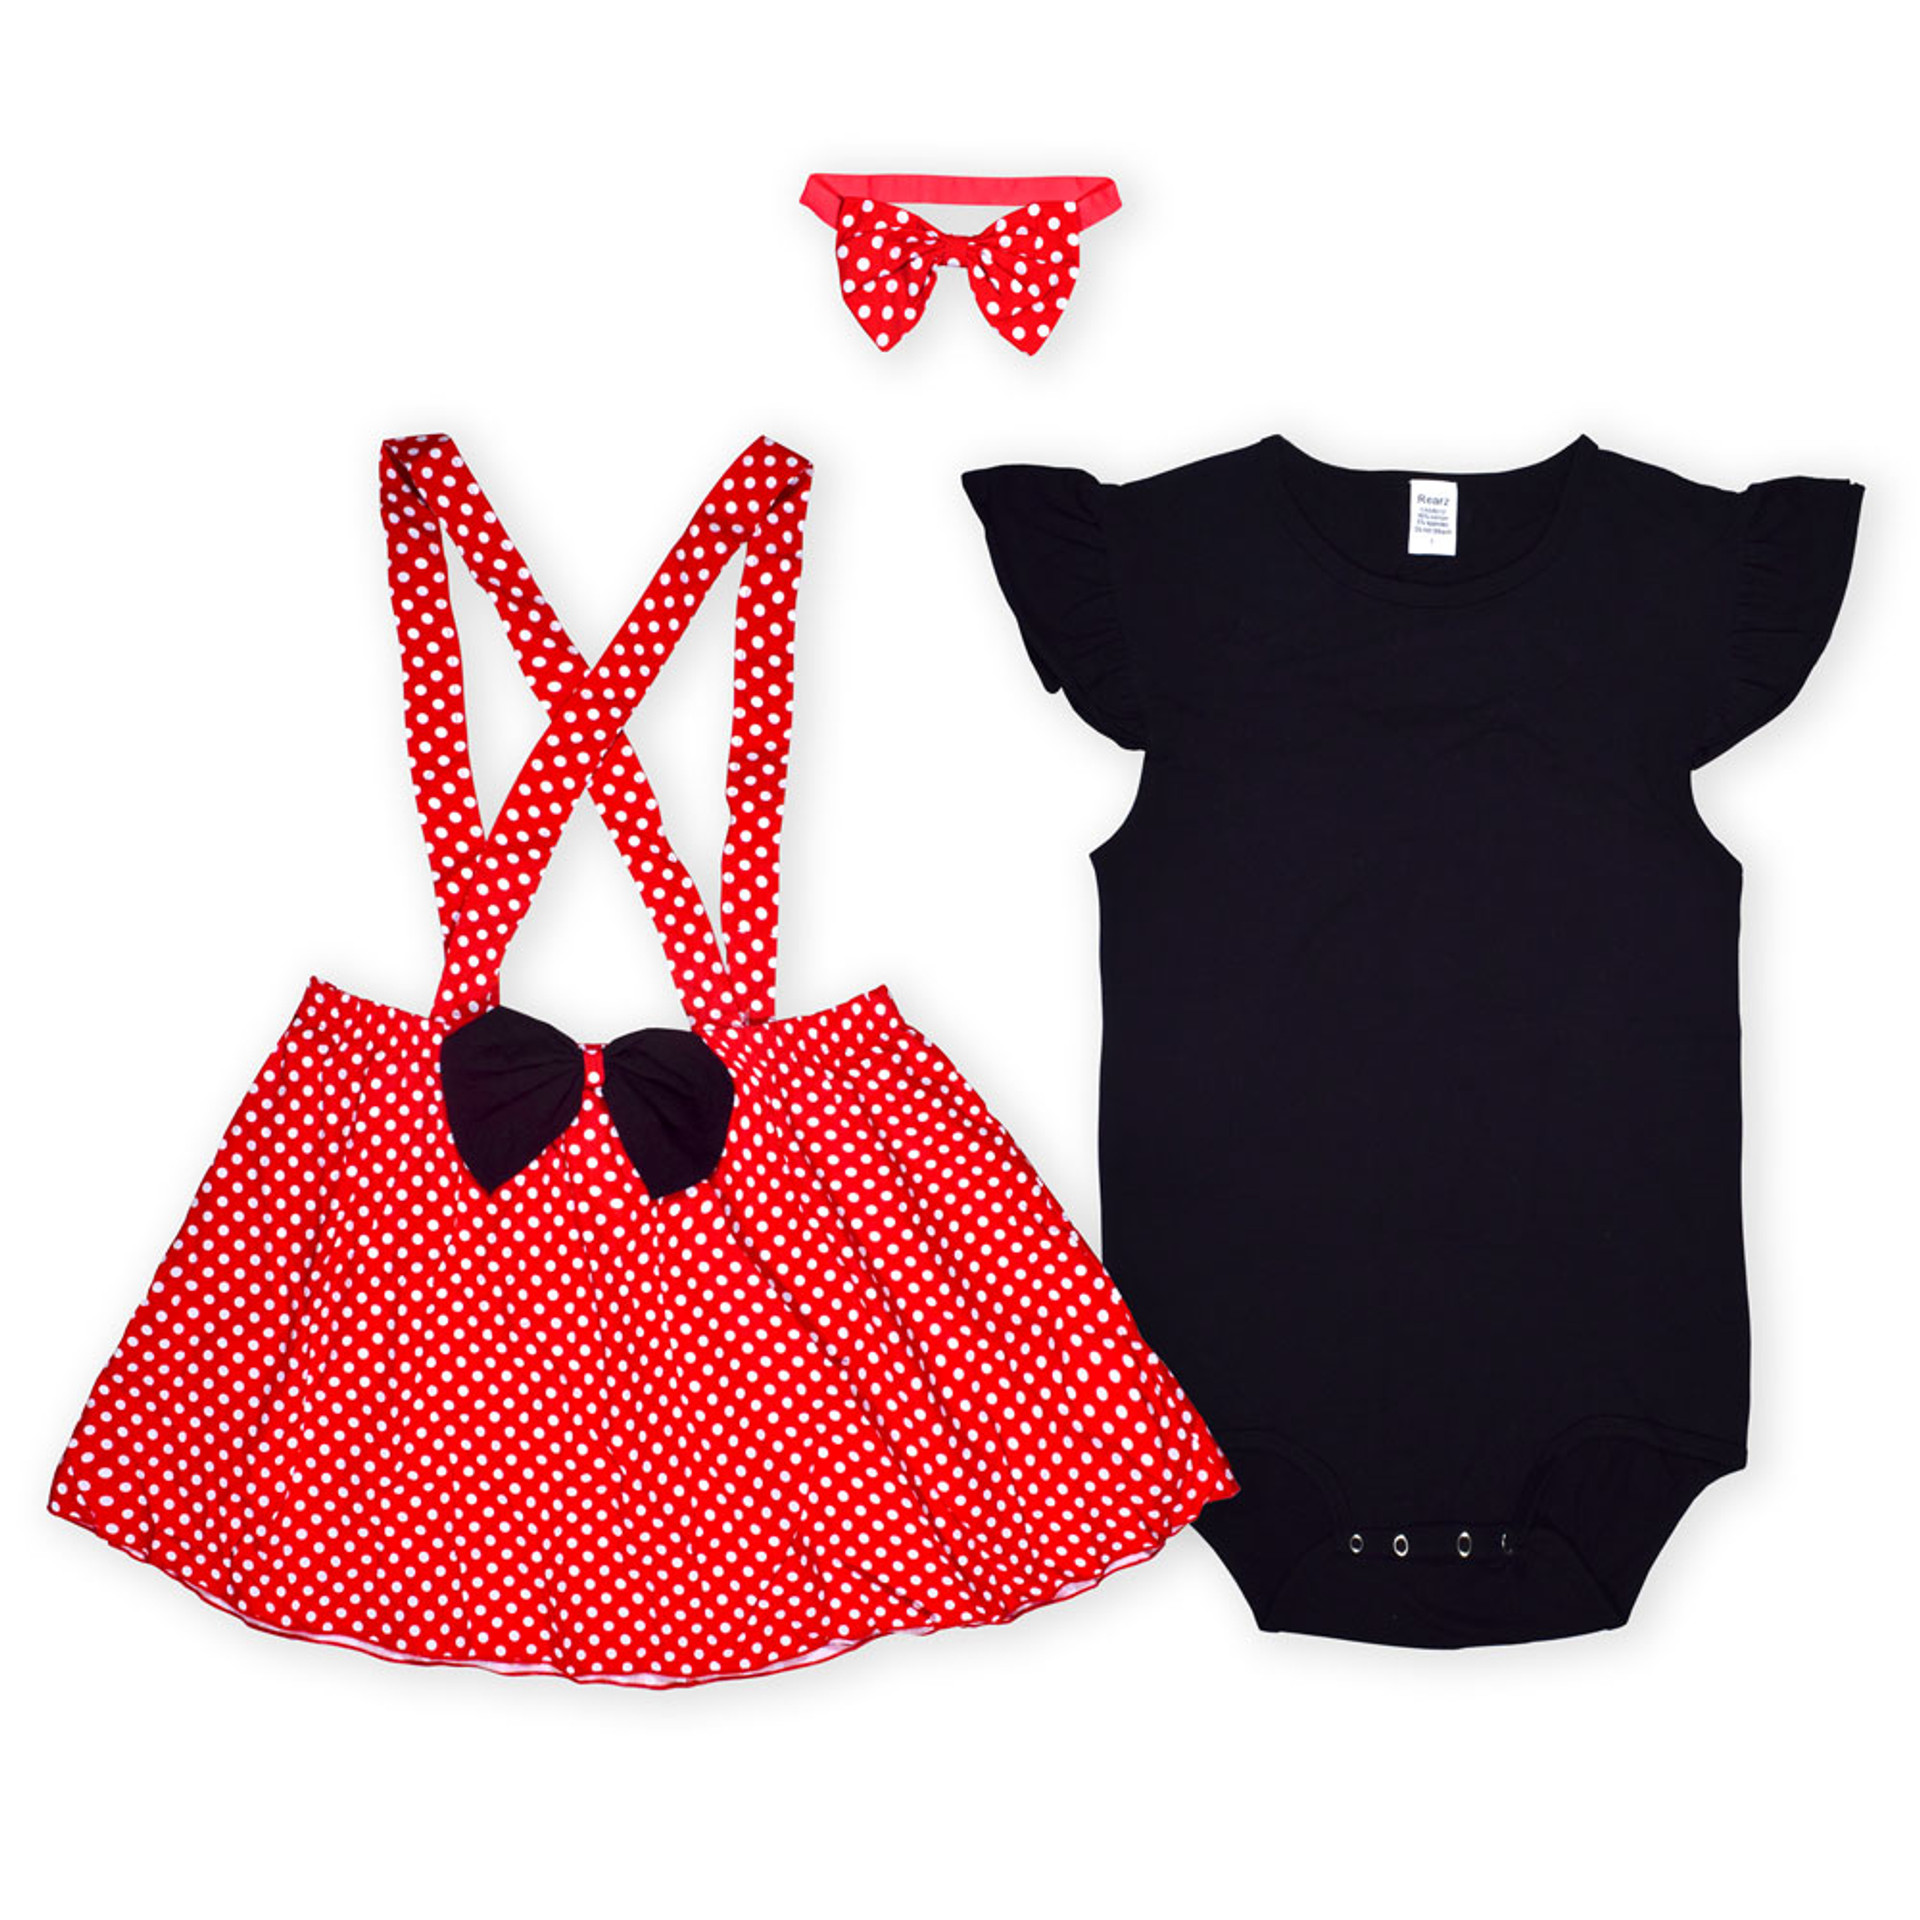 Rearz ABDL Outfits | Polka Dot Outfit with Bow